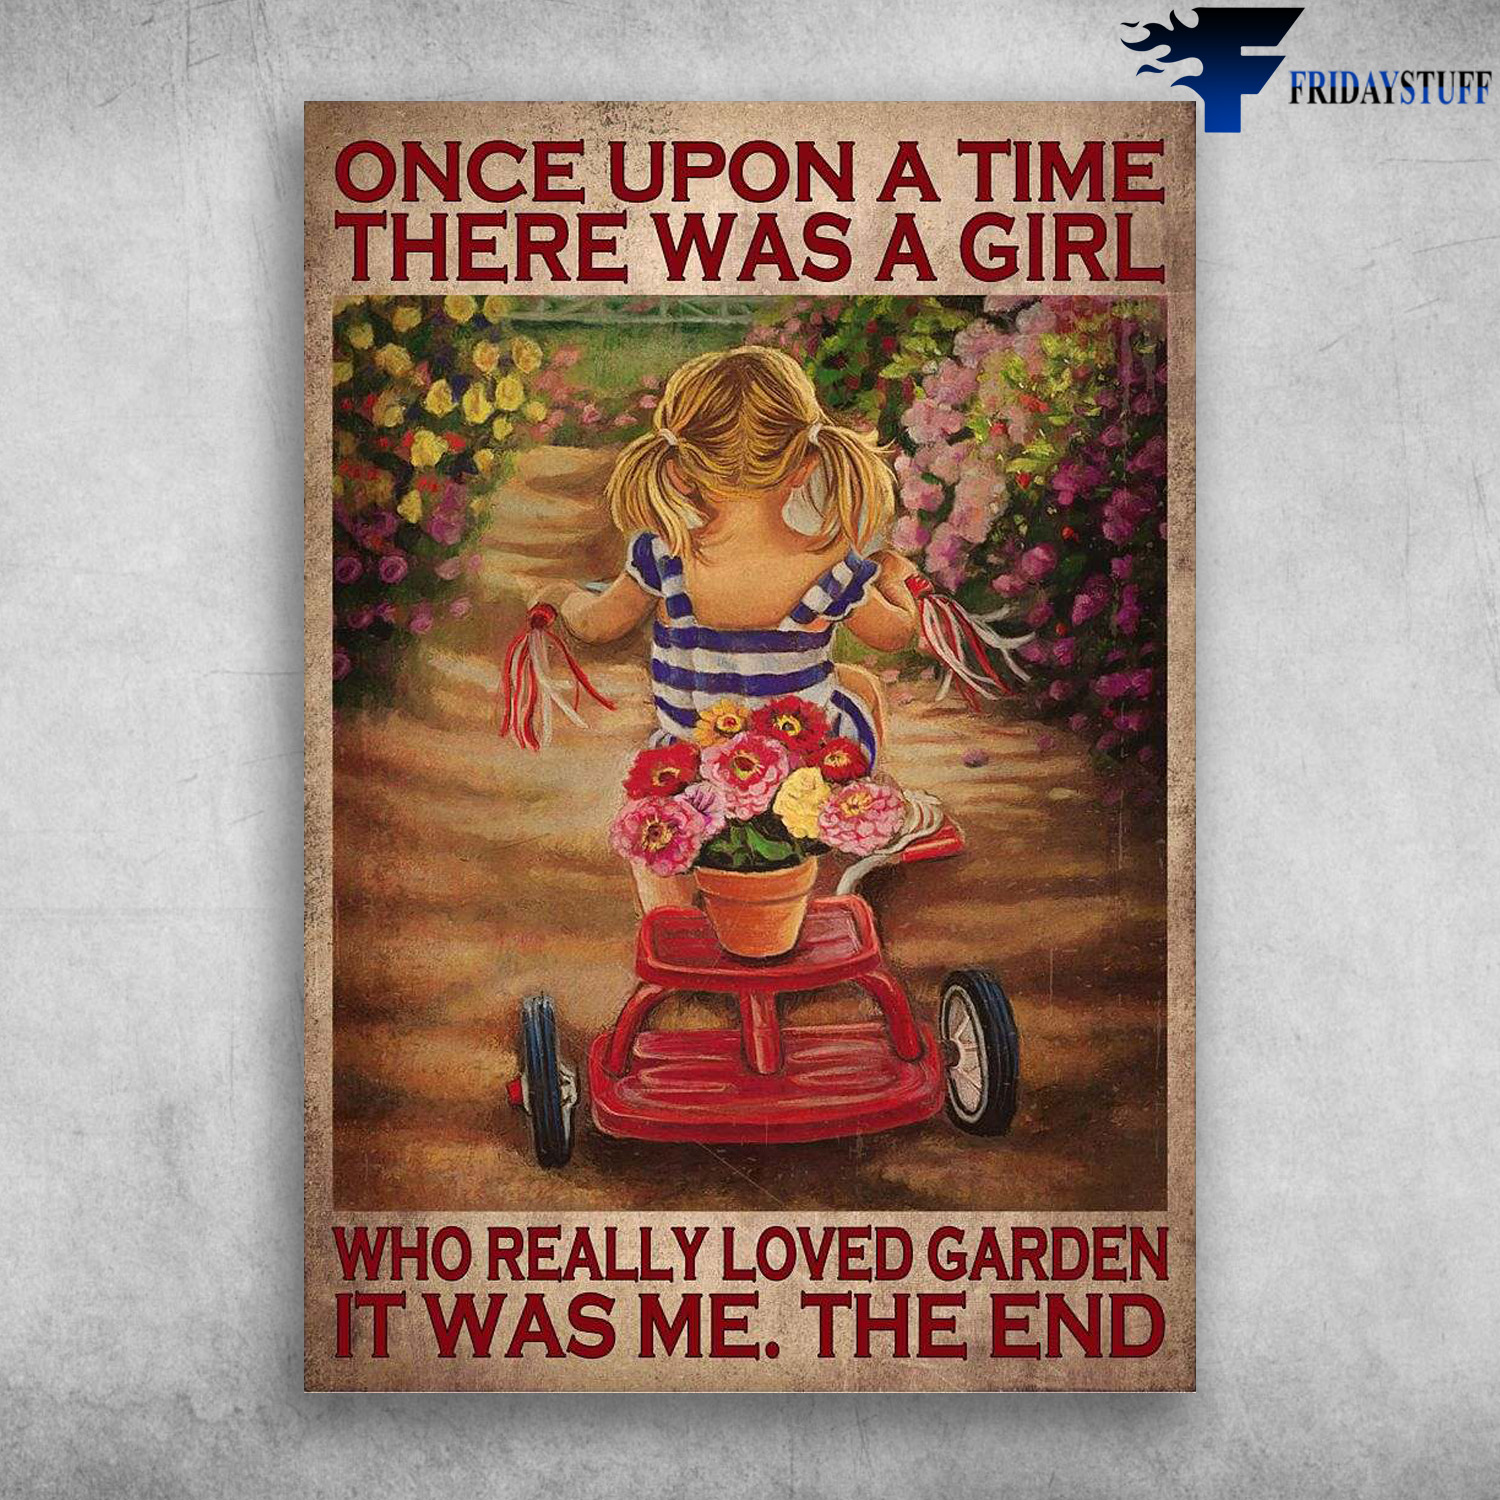 Little Girl Gardening, Garden Girl - Once Upon A Time, There Was A Girl, Who REally Loved Garden, It Was Me, The End